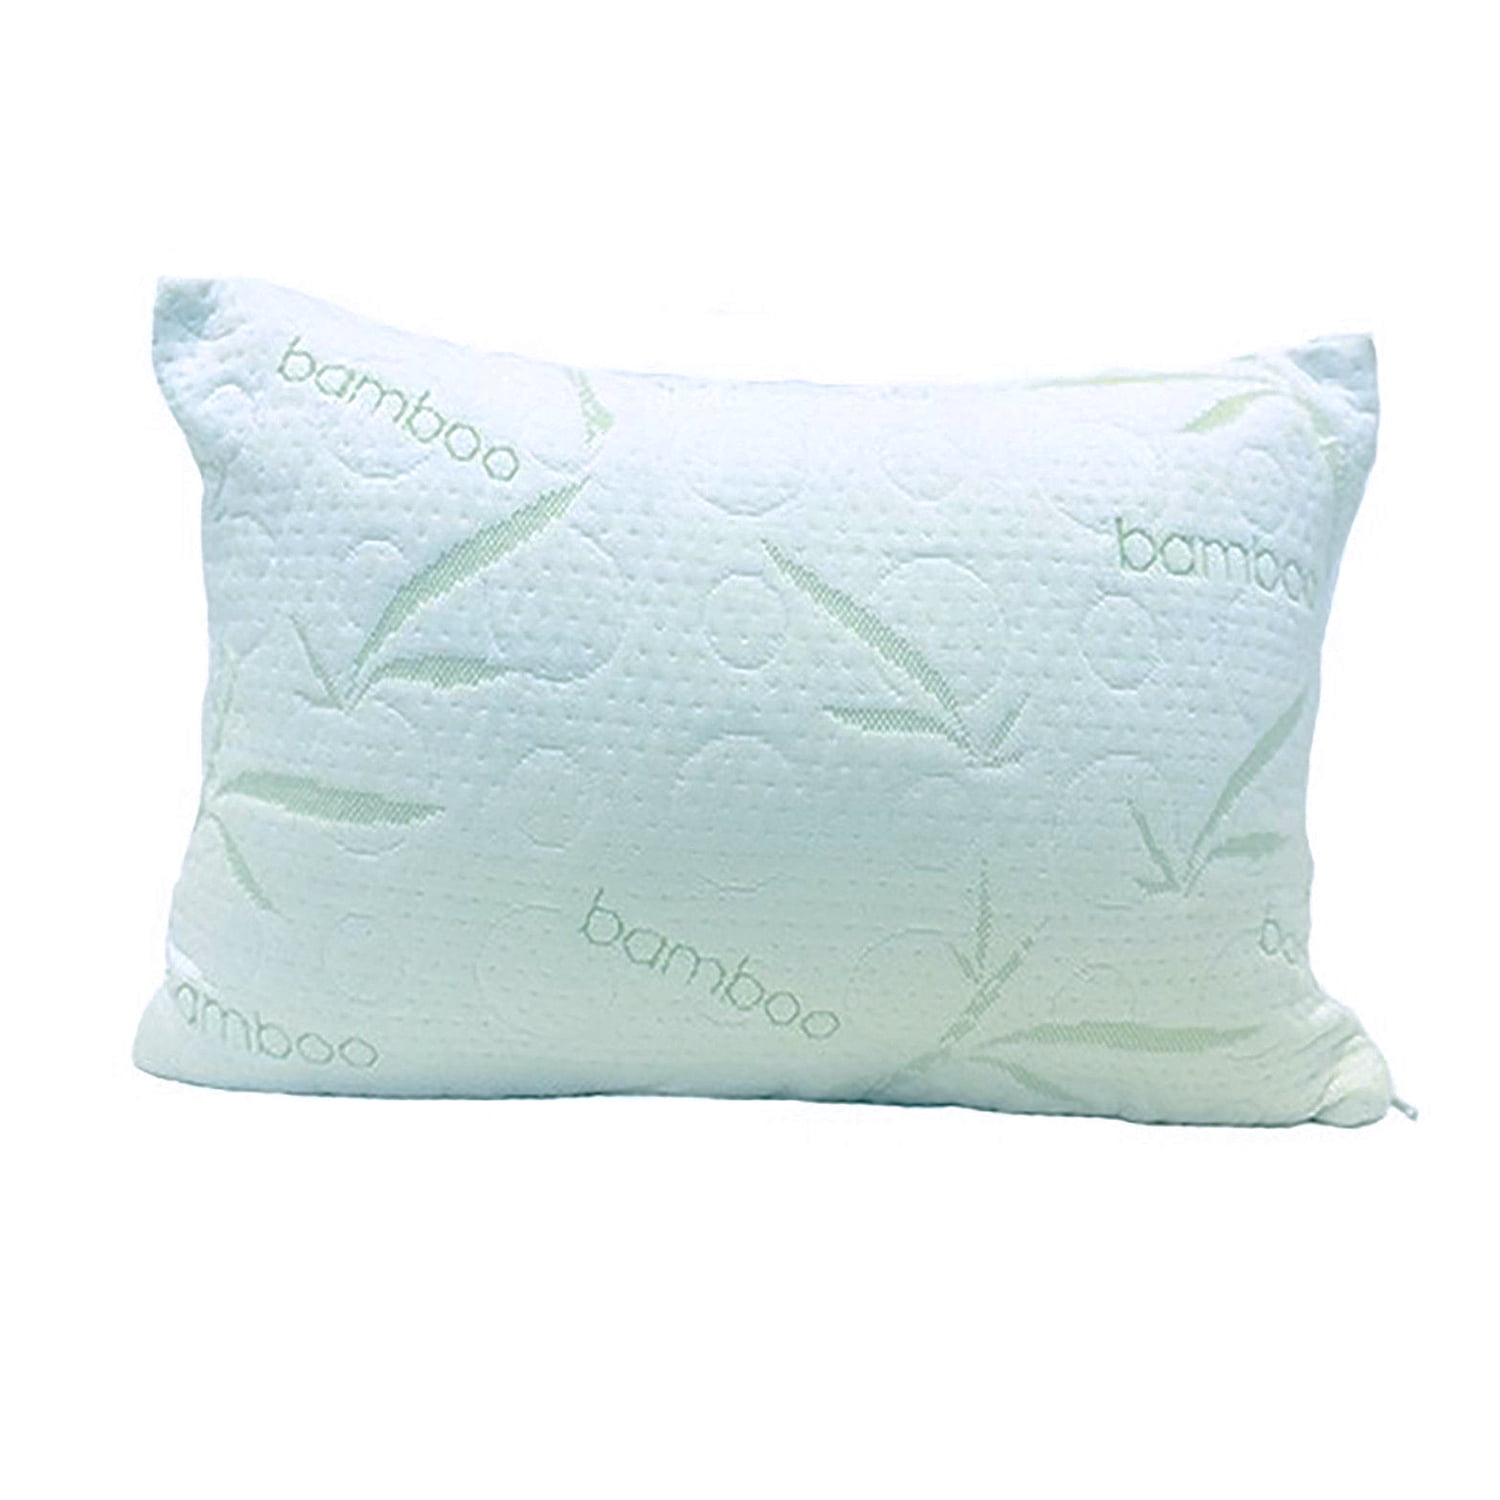 Large Fluffy Version —**NEW ITEM DISCOUNT** Luxury Bamboo Memory Foam Pillow 